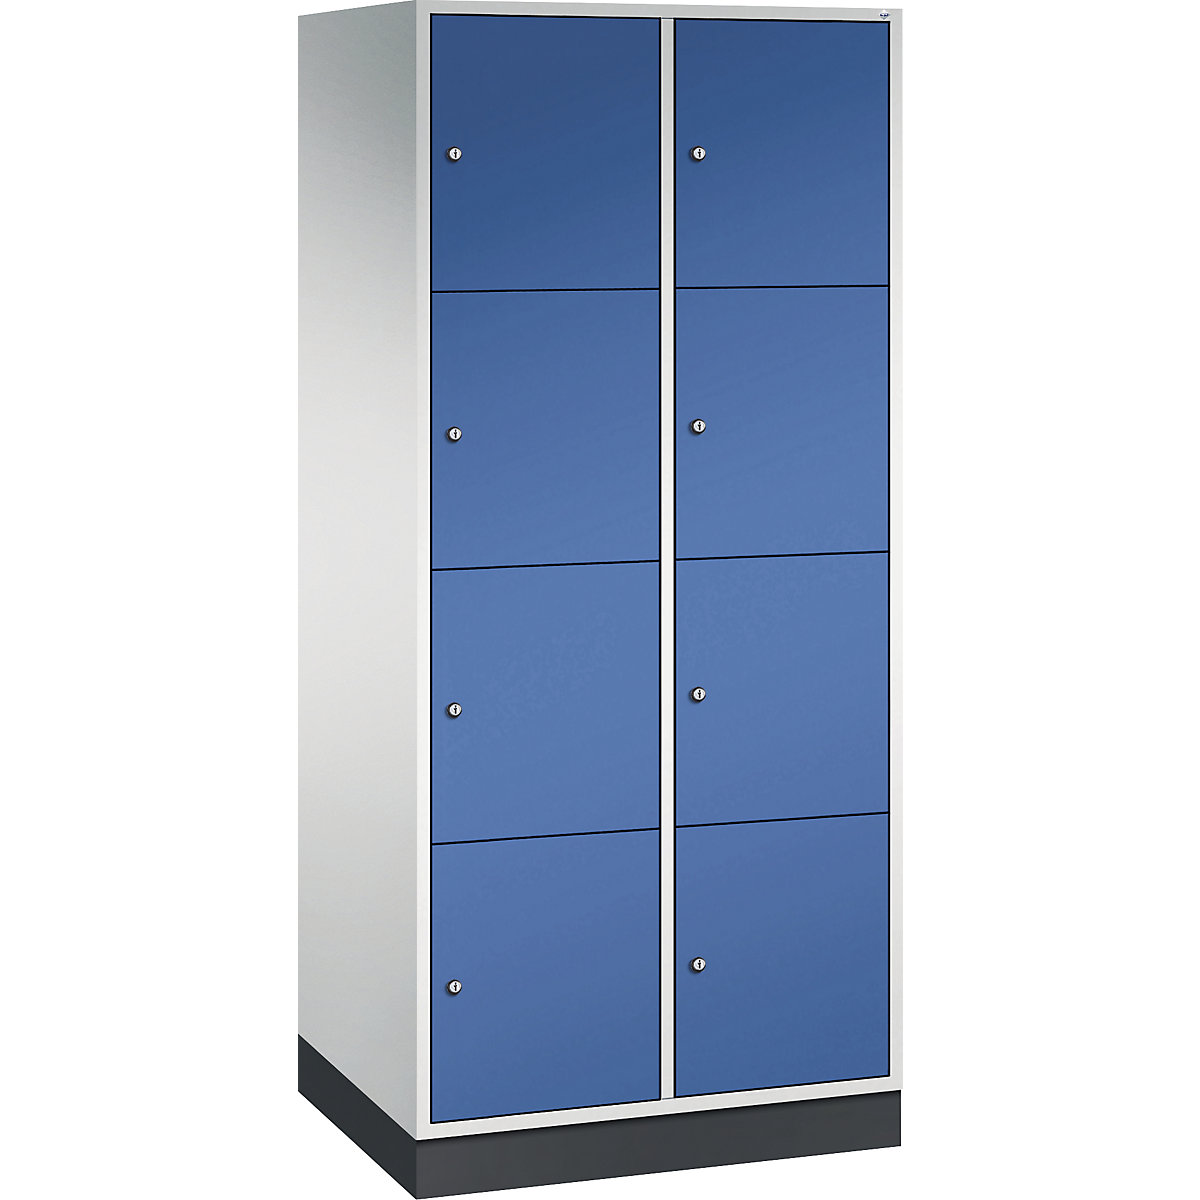 INTRO steel compartment locker, compartment height 435 mm – C+P, WxD 820 x 600 mm, 8 compartments, light grey body, gentian blue doors